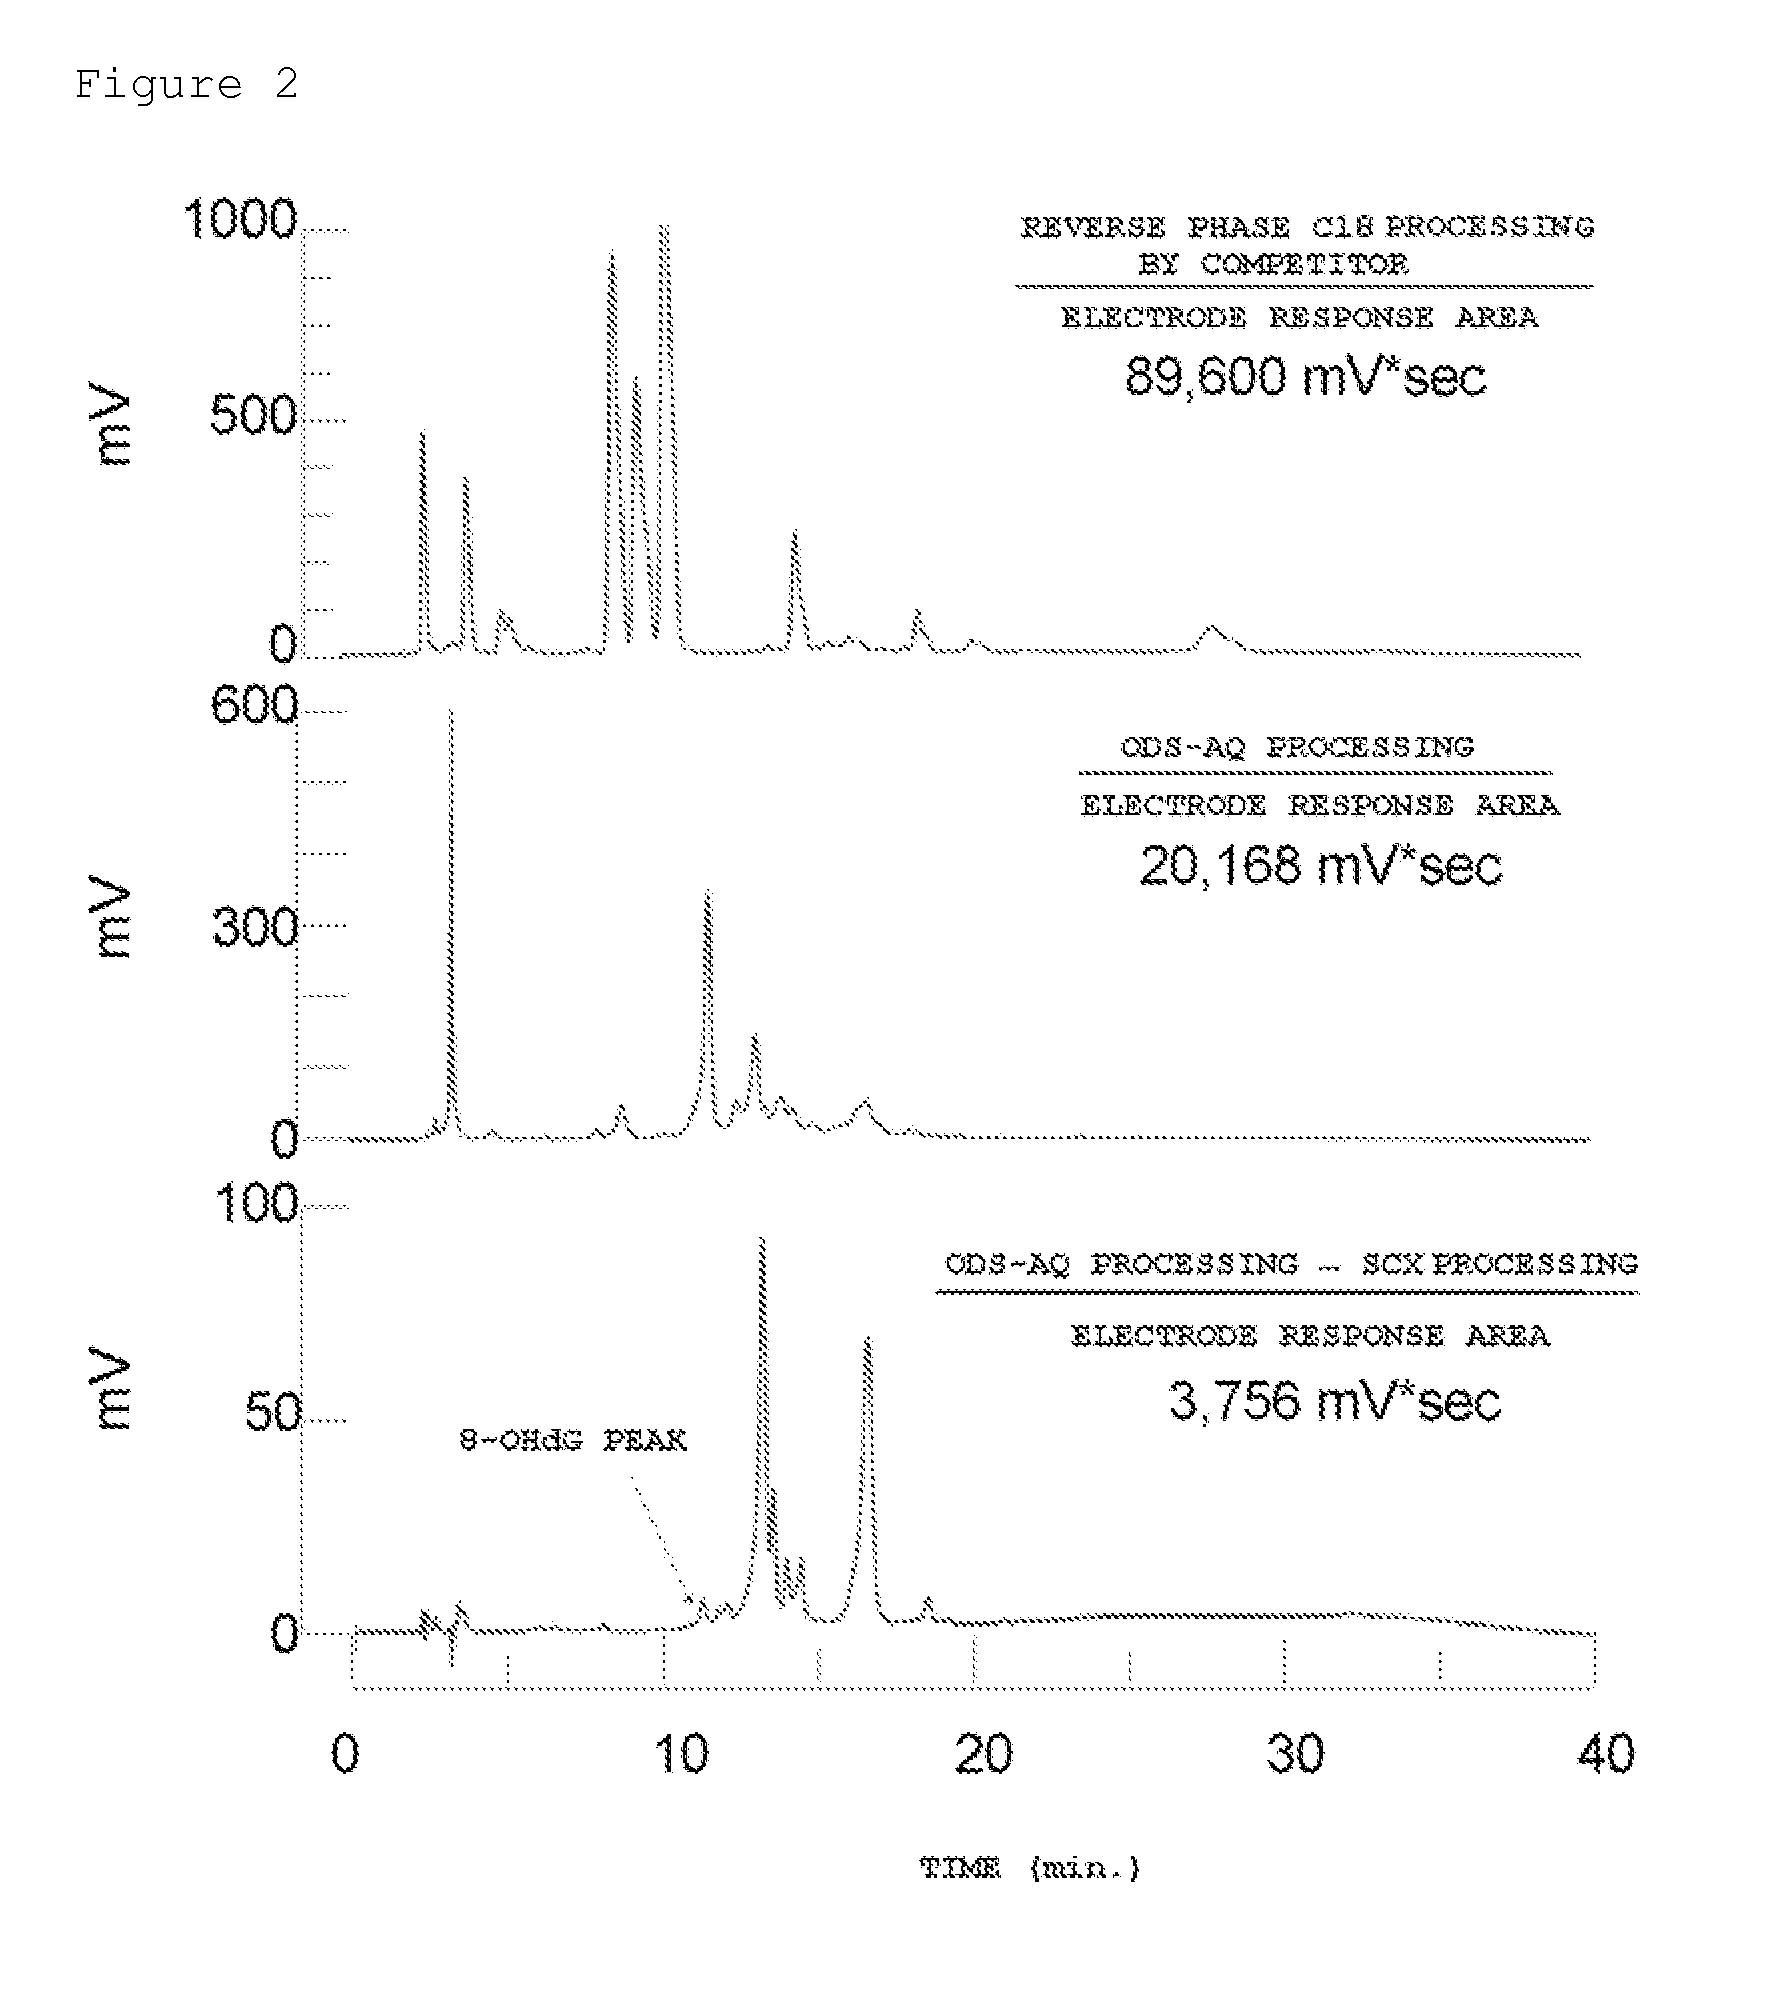 APPARATUS AND METHOD FOR MEASURING 8-OHdG